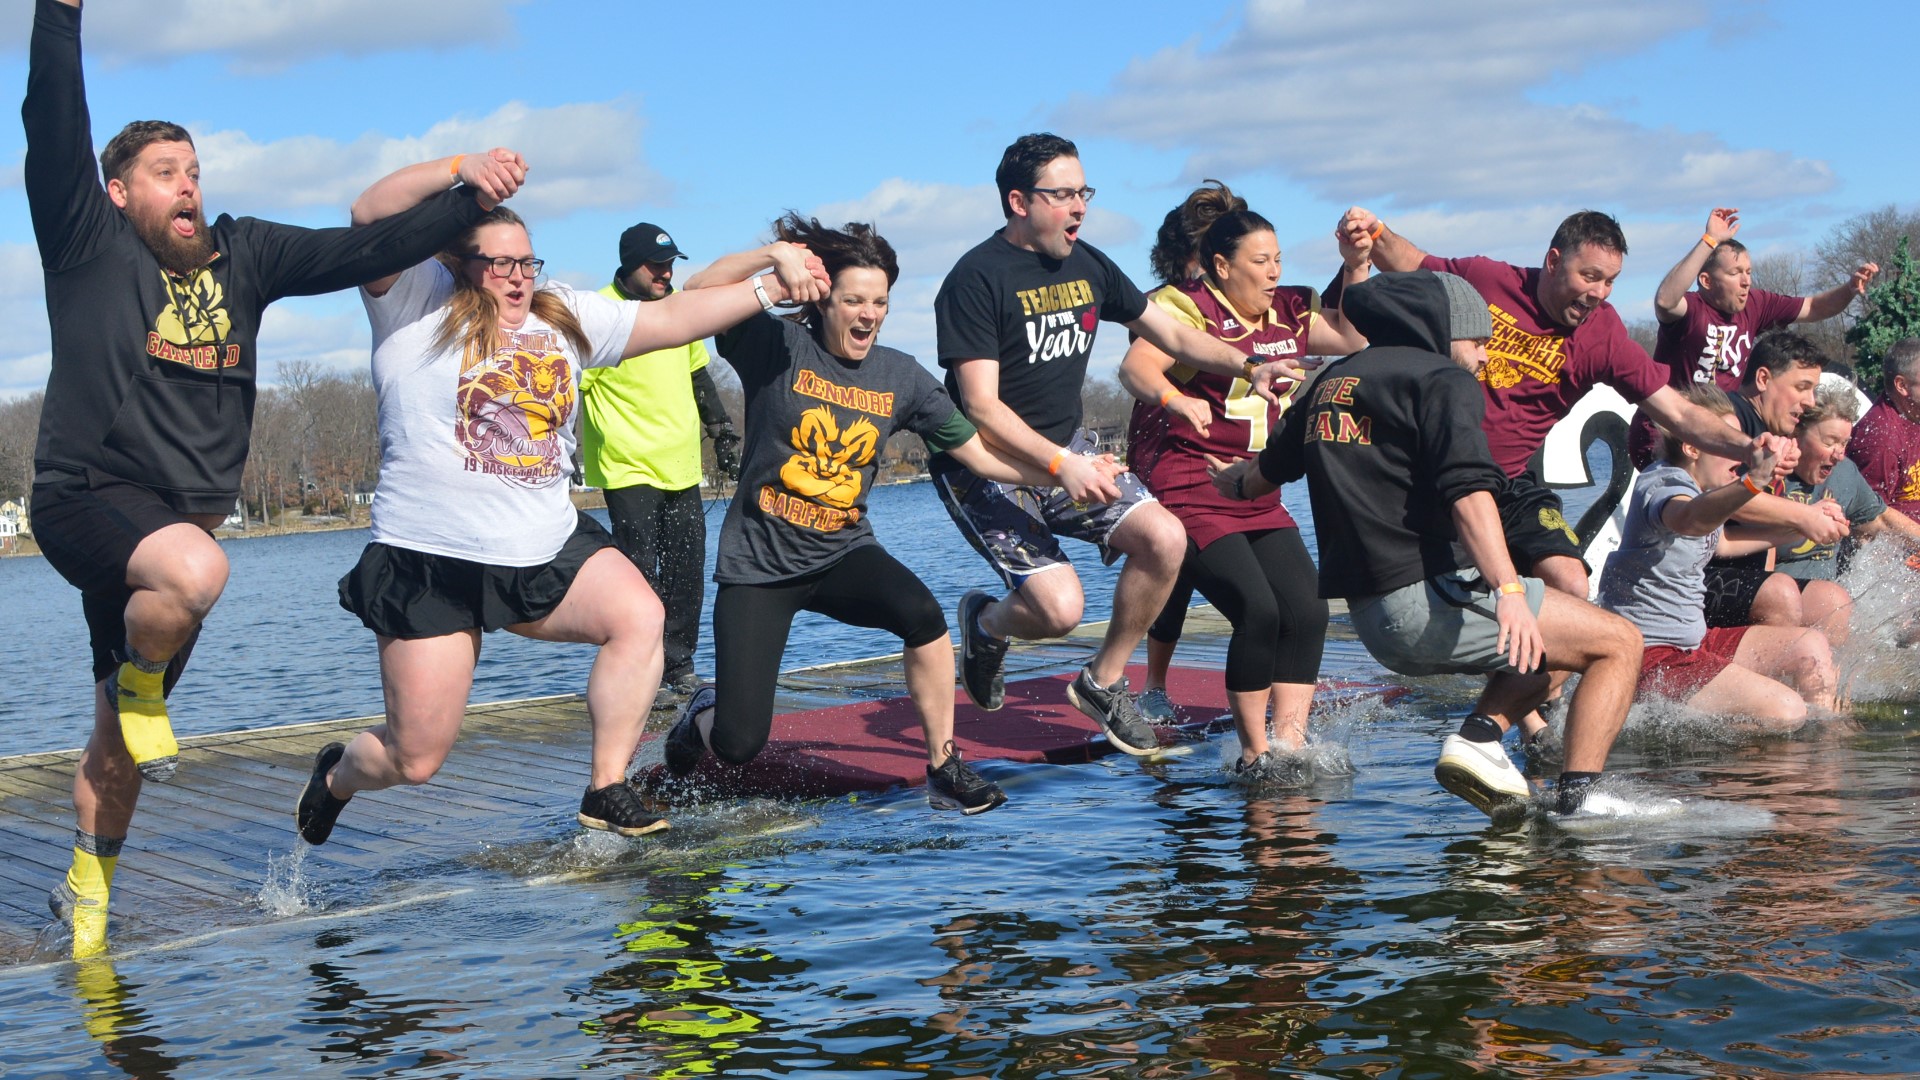 Although it was a bitterly cold afternoon, more than 750 people packed the beach at Portage Lakes State Park to go for a swim. $170,000+ was raised for charity.